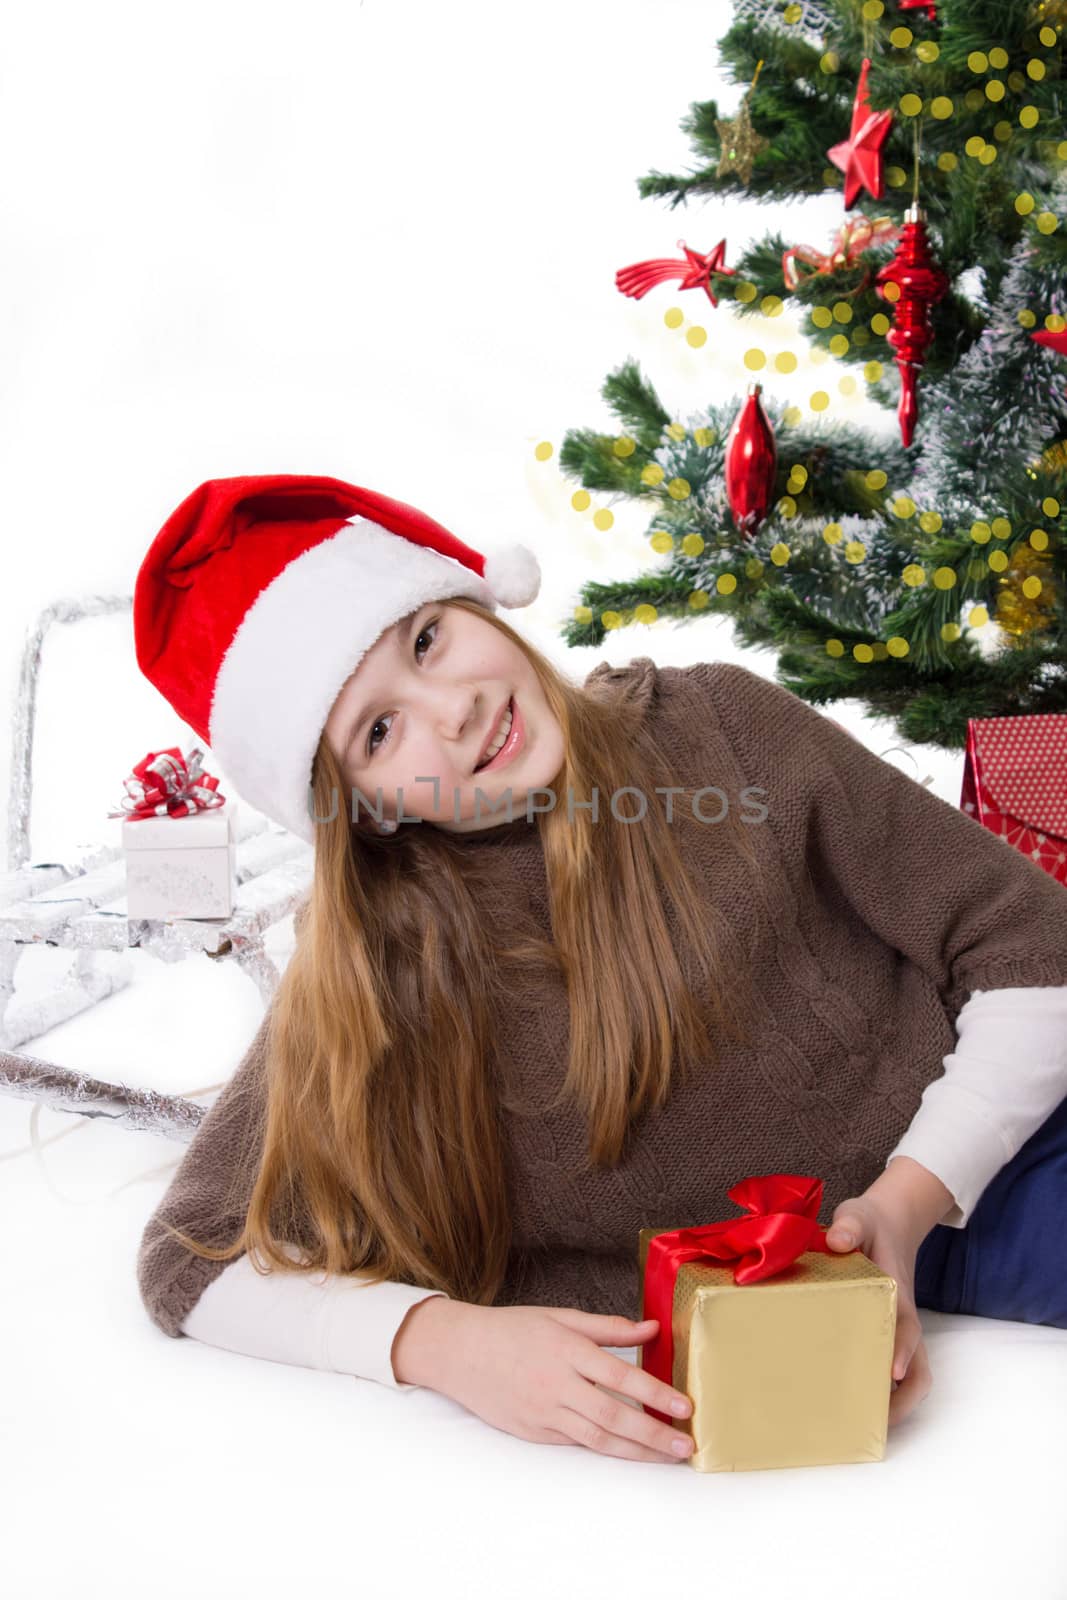 Teen girl in Santa hat with gifts under Christmas tree by Angel_a